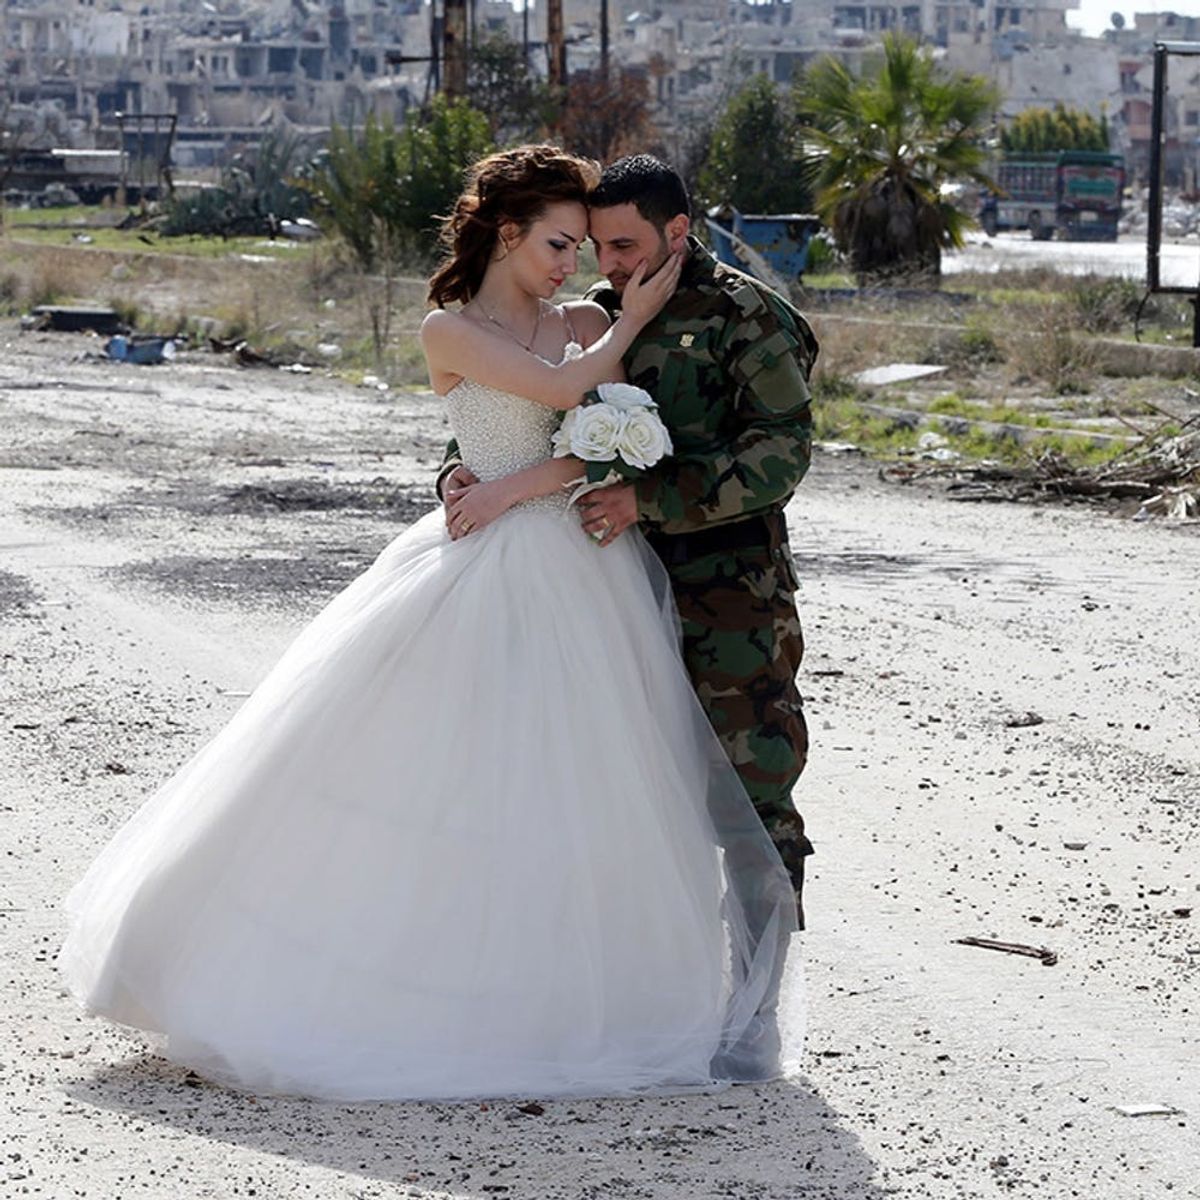 These Syrian Wedding Photos Are Going Viral for a Very Important Reason